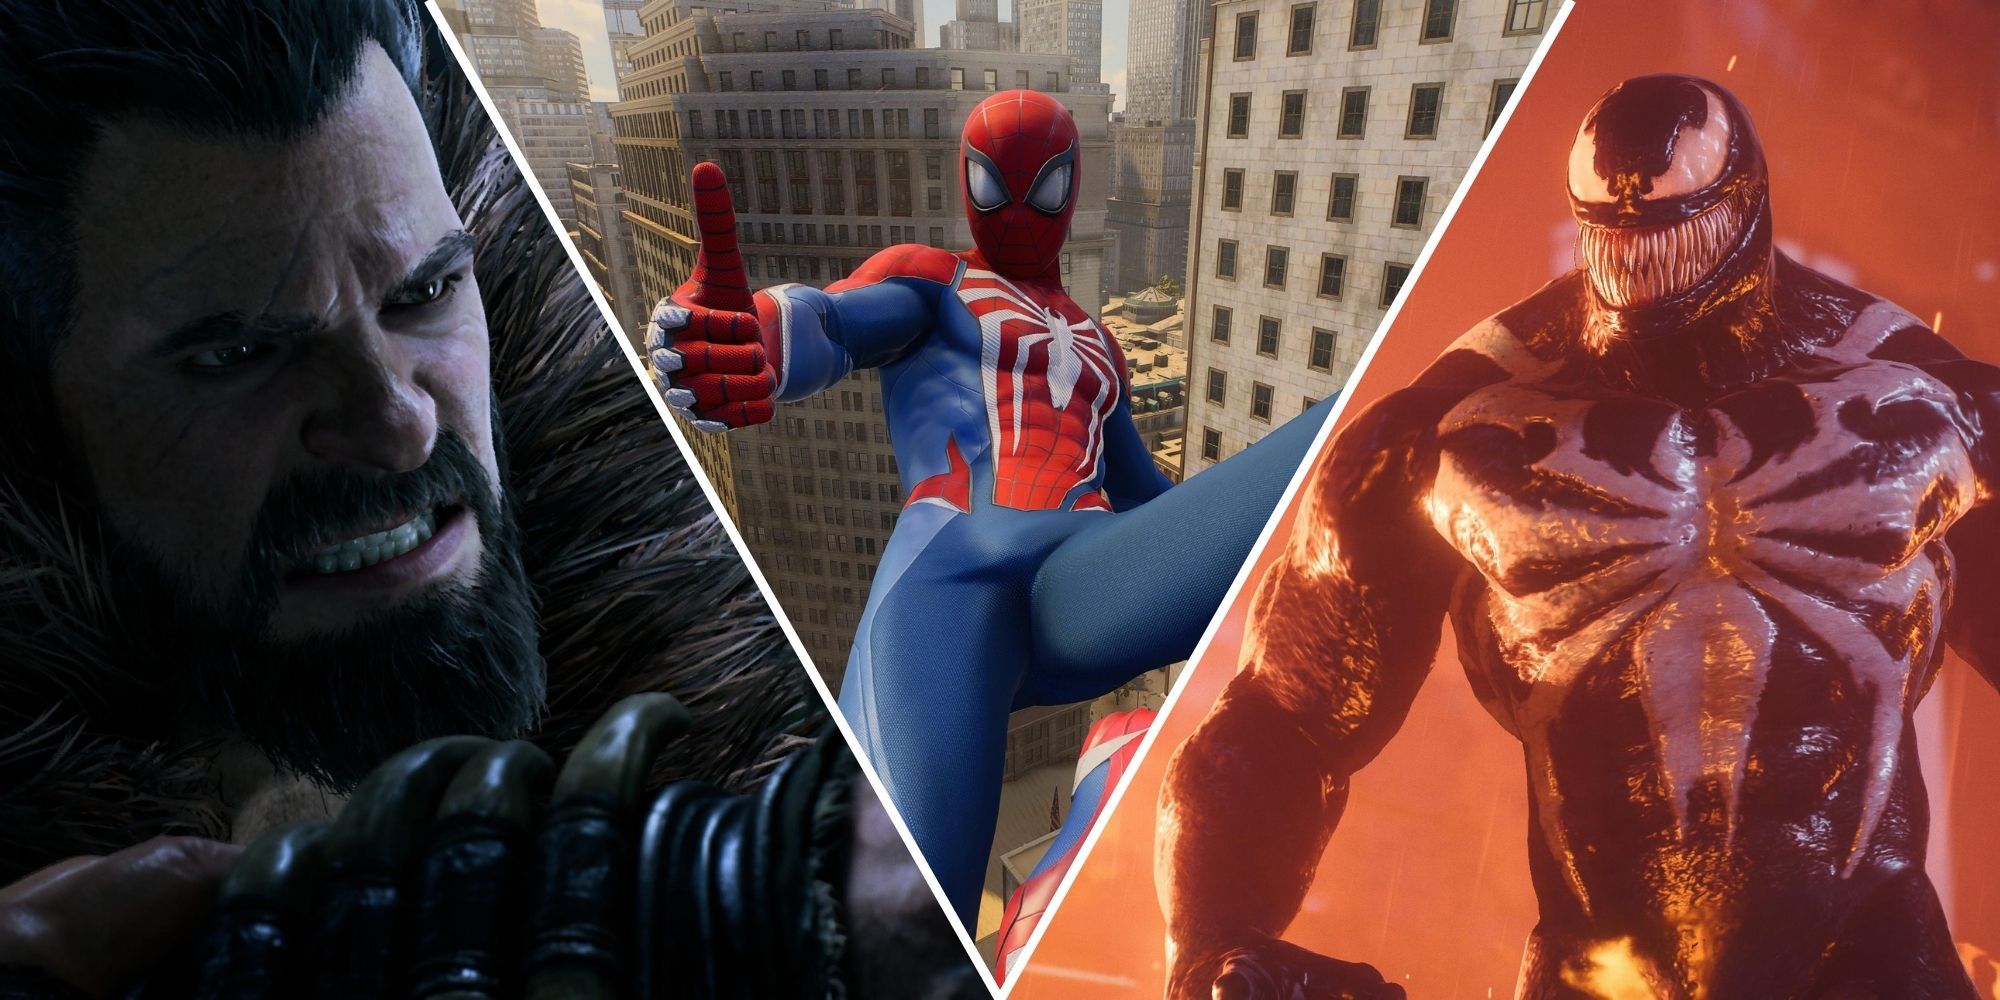 Marvel's Spider-Man 2's Symbiote Gameplay Should Take Cues From